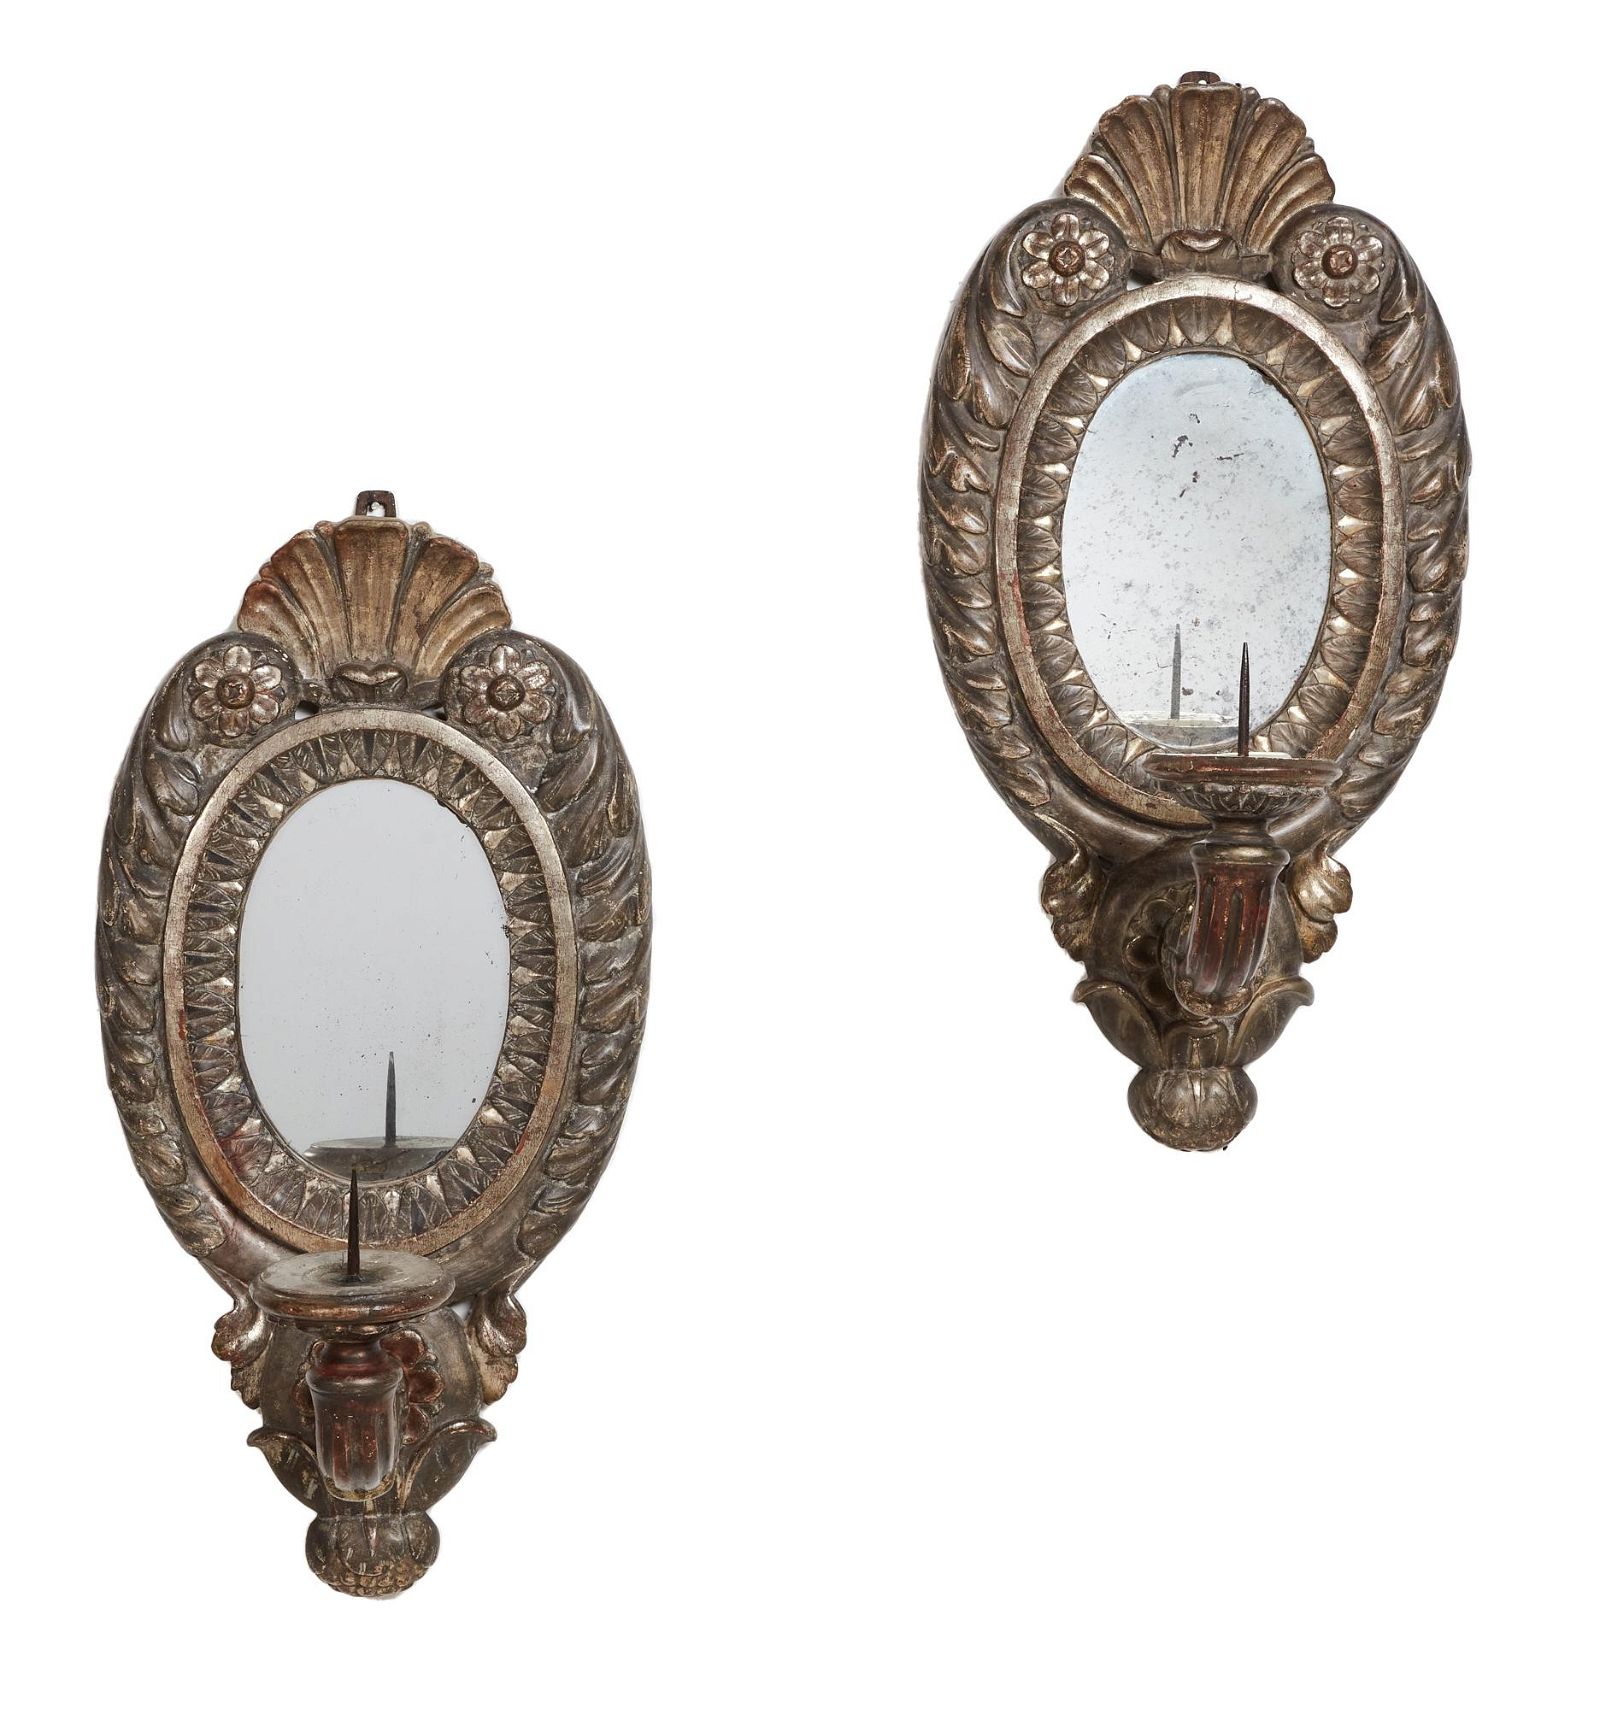 PAIR OF BAROQUE STYLE SILVERED